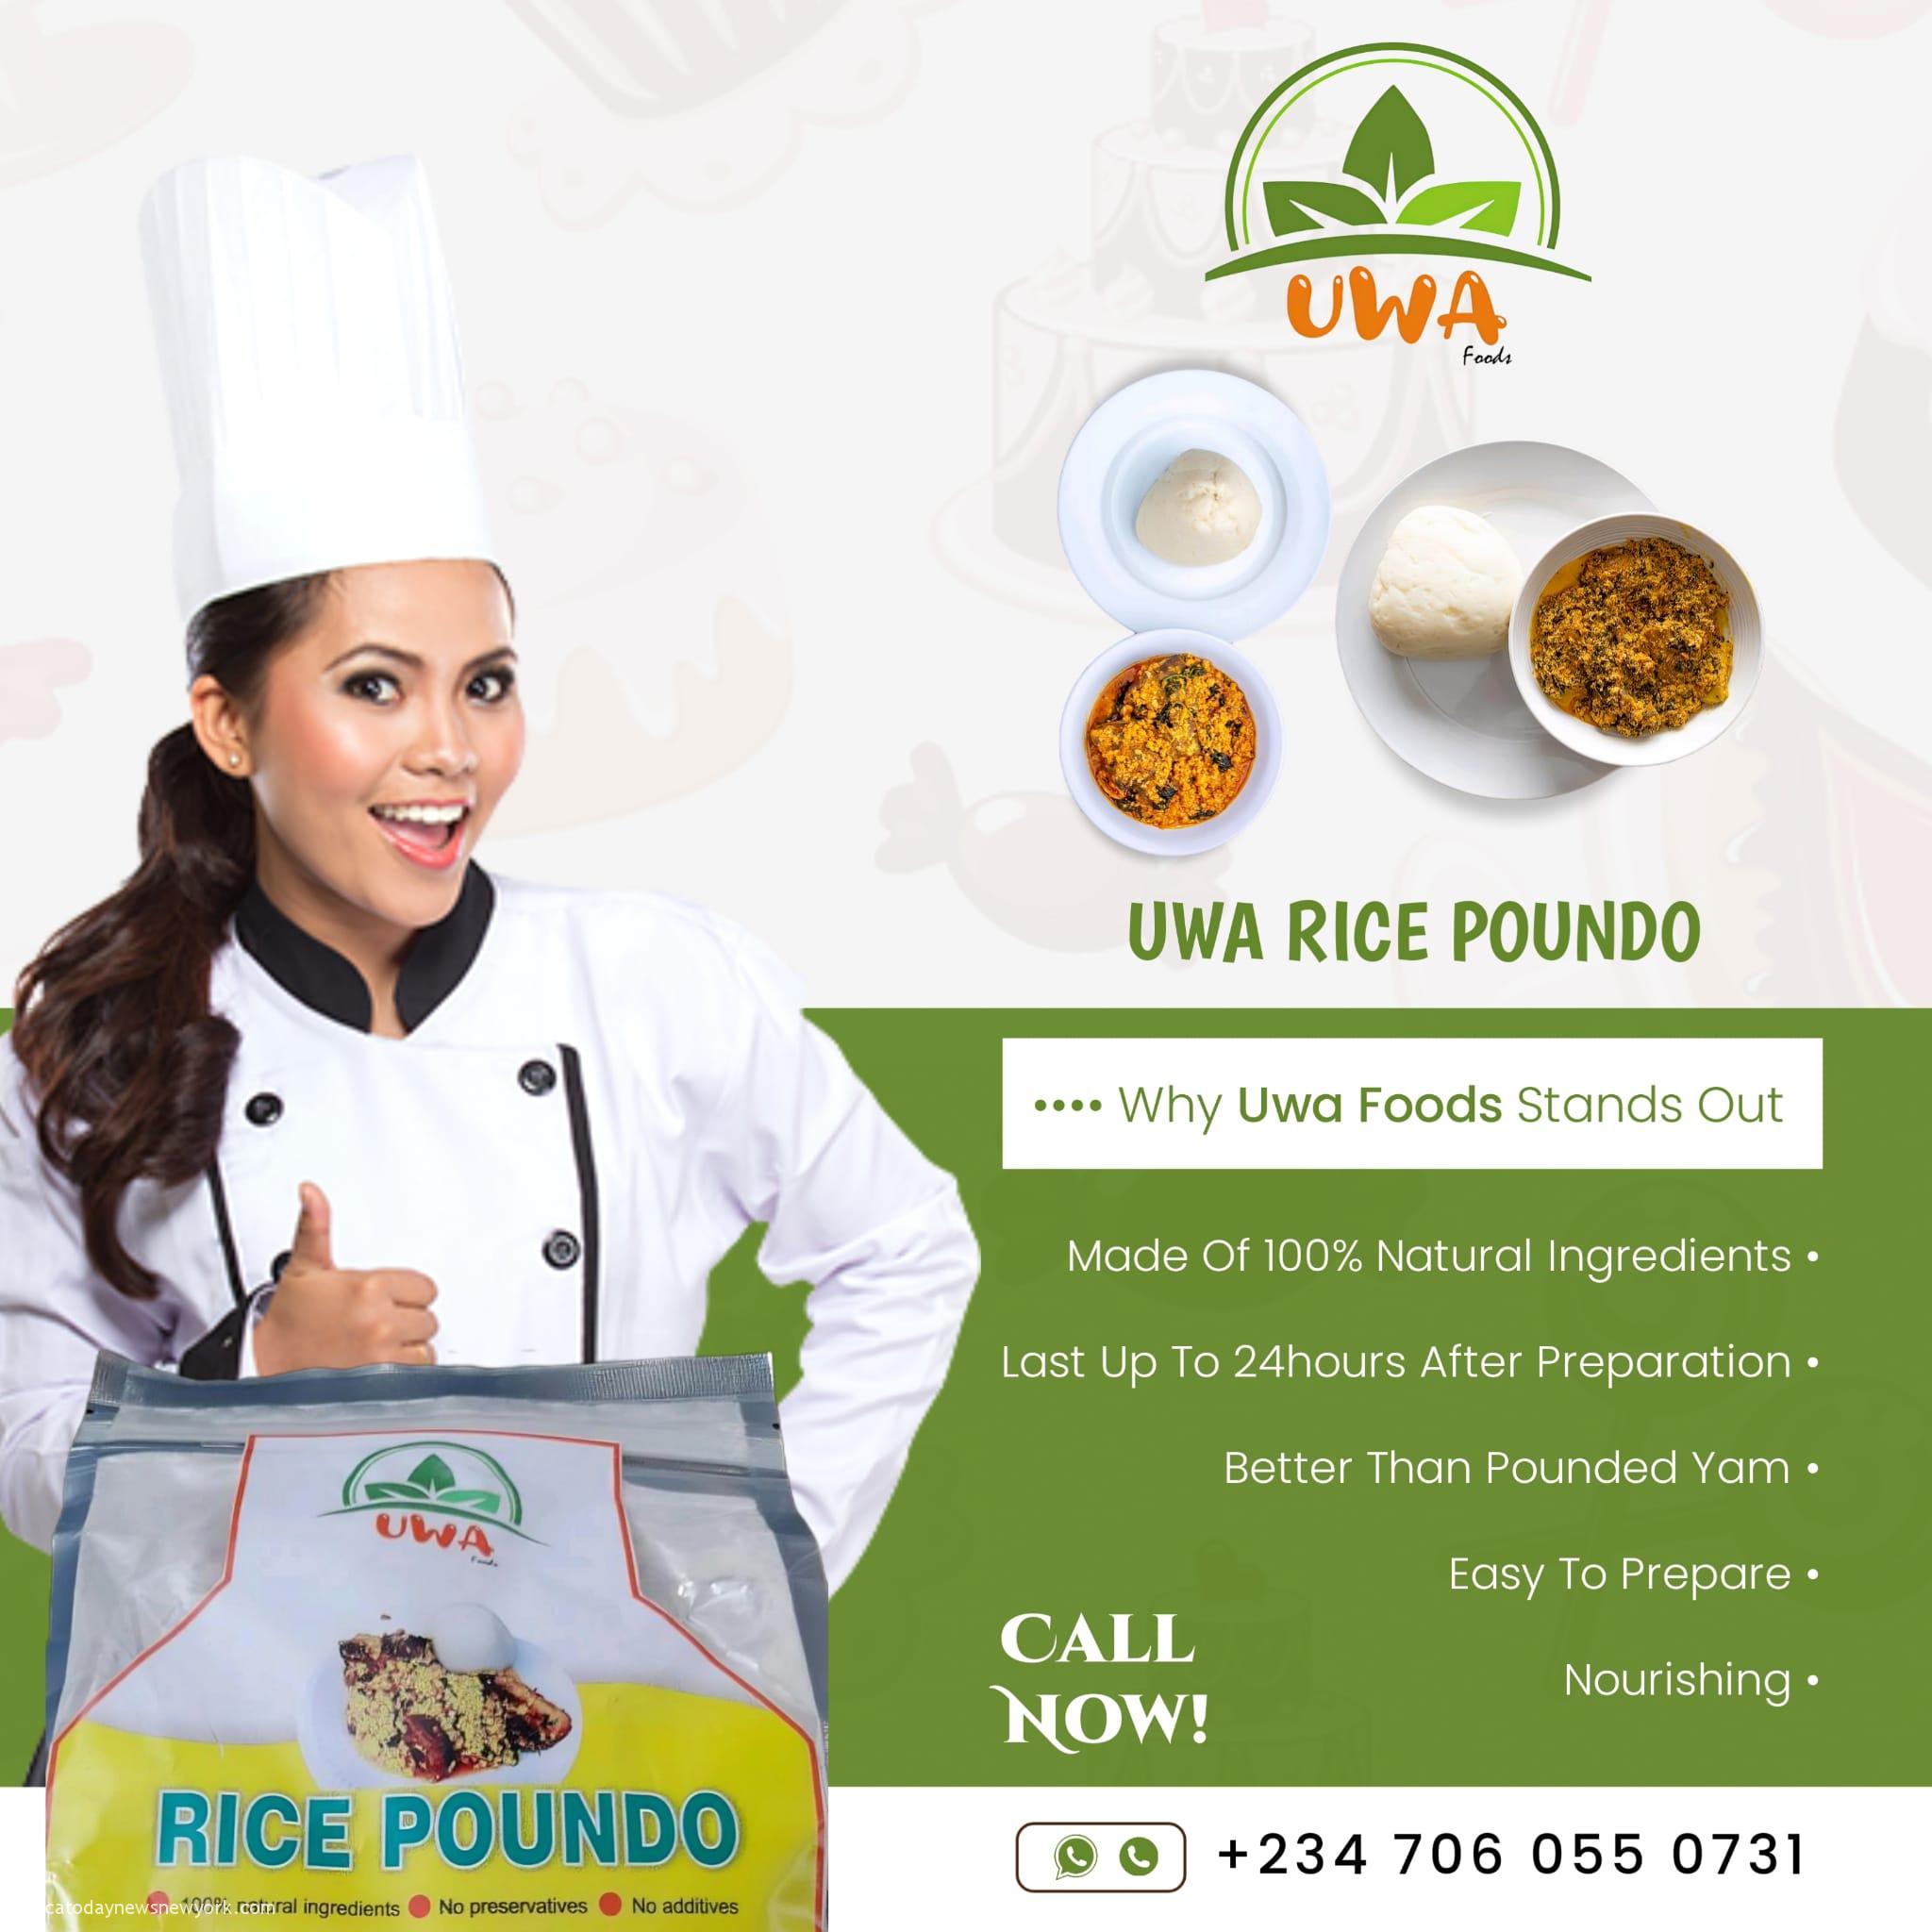 Uwa Rice Poundo The Perfect Natural 'Swallow' For Everyone